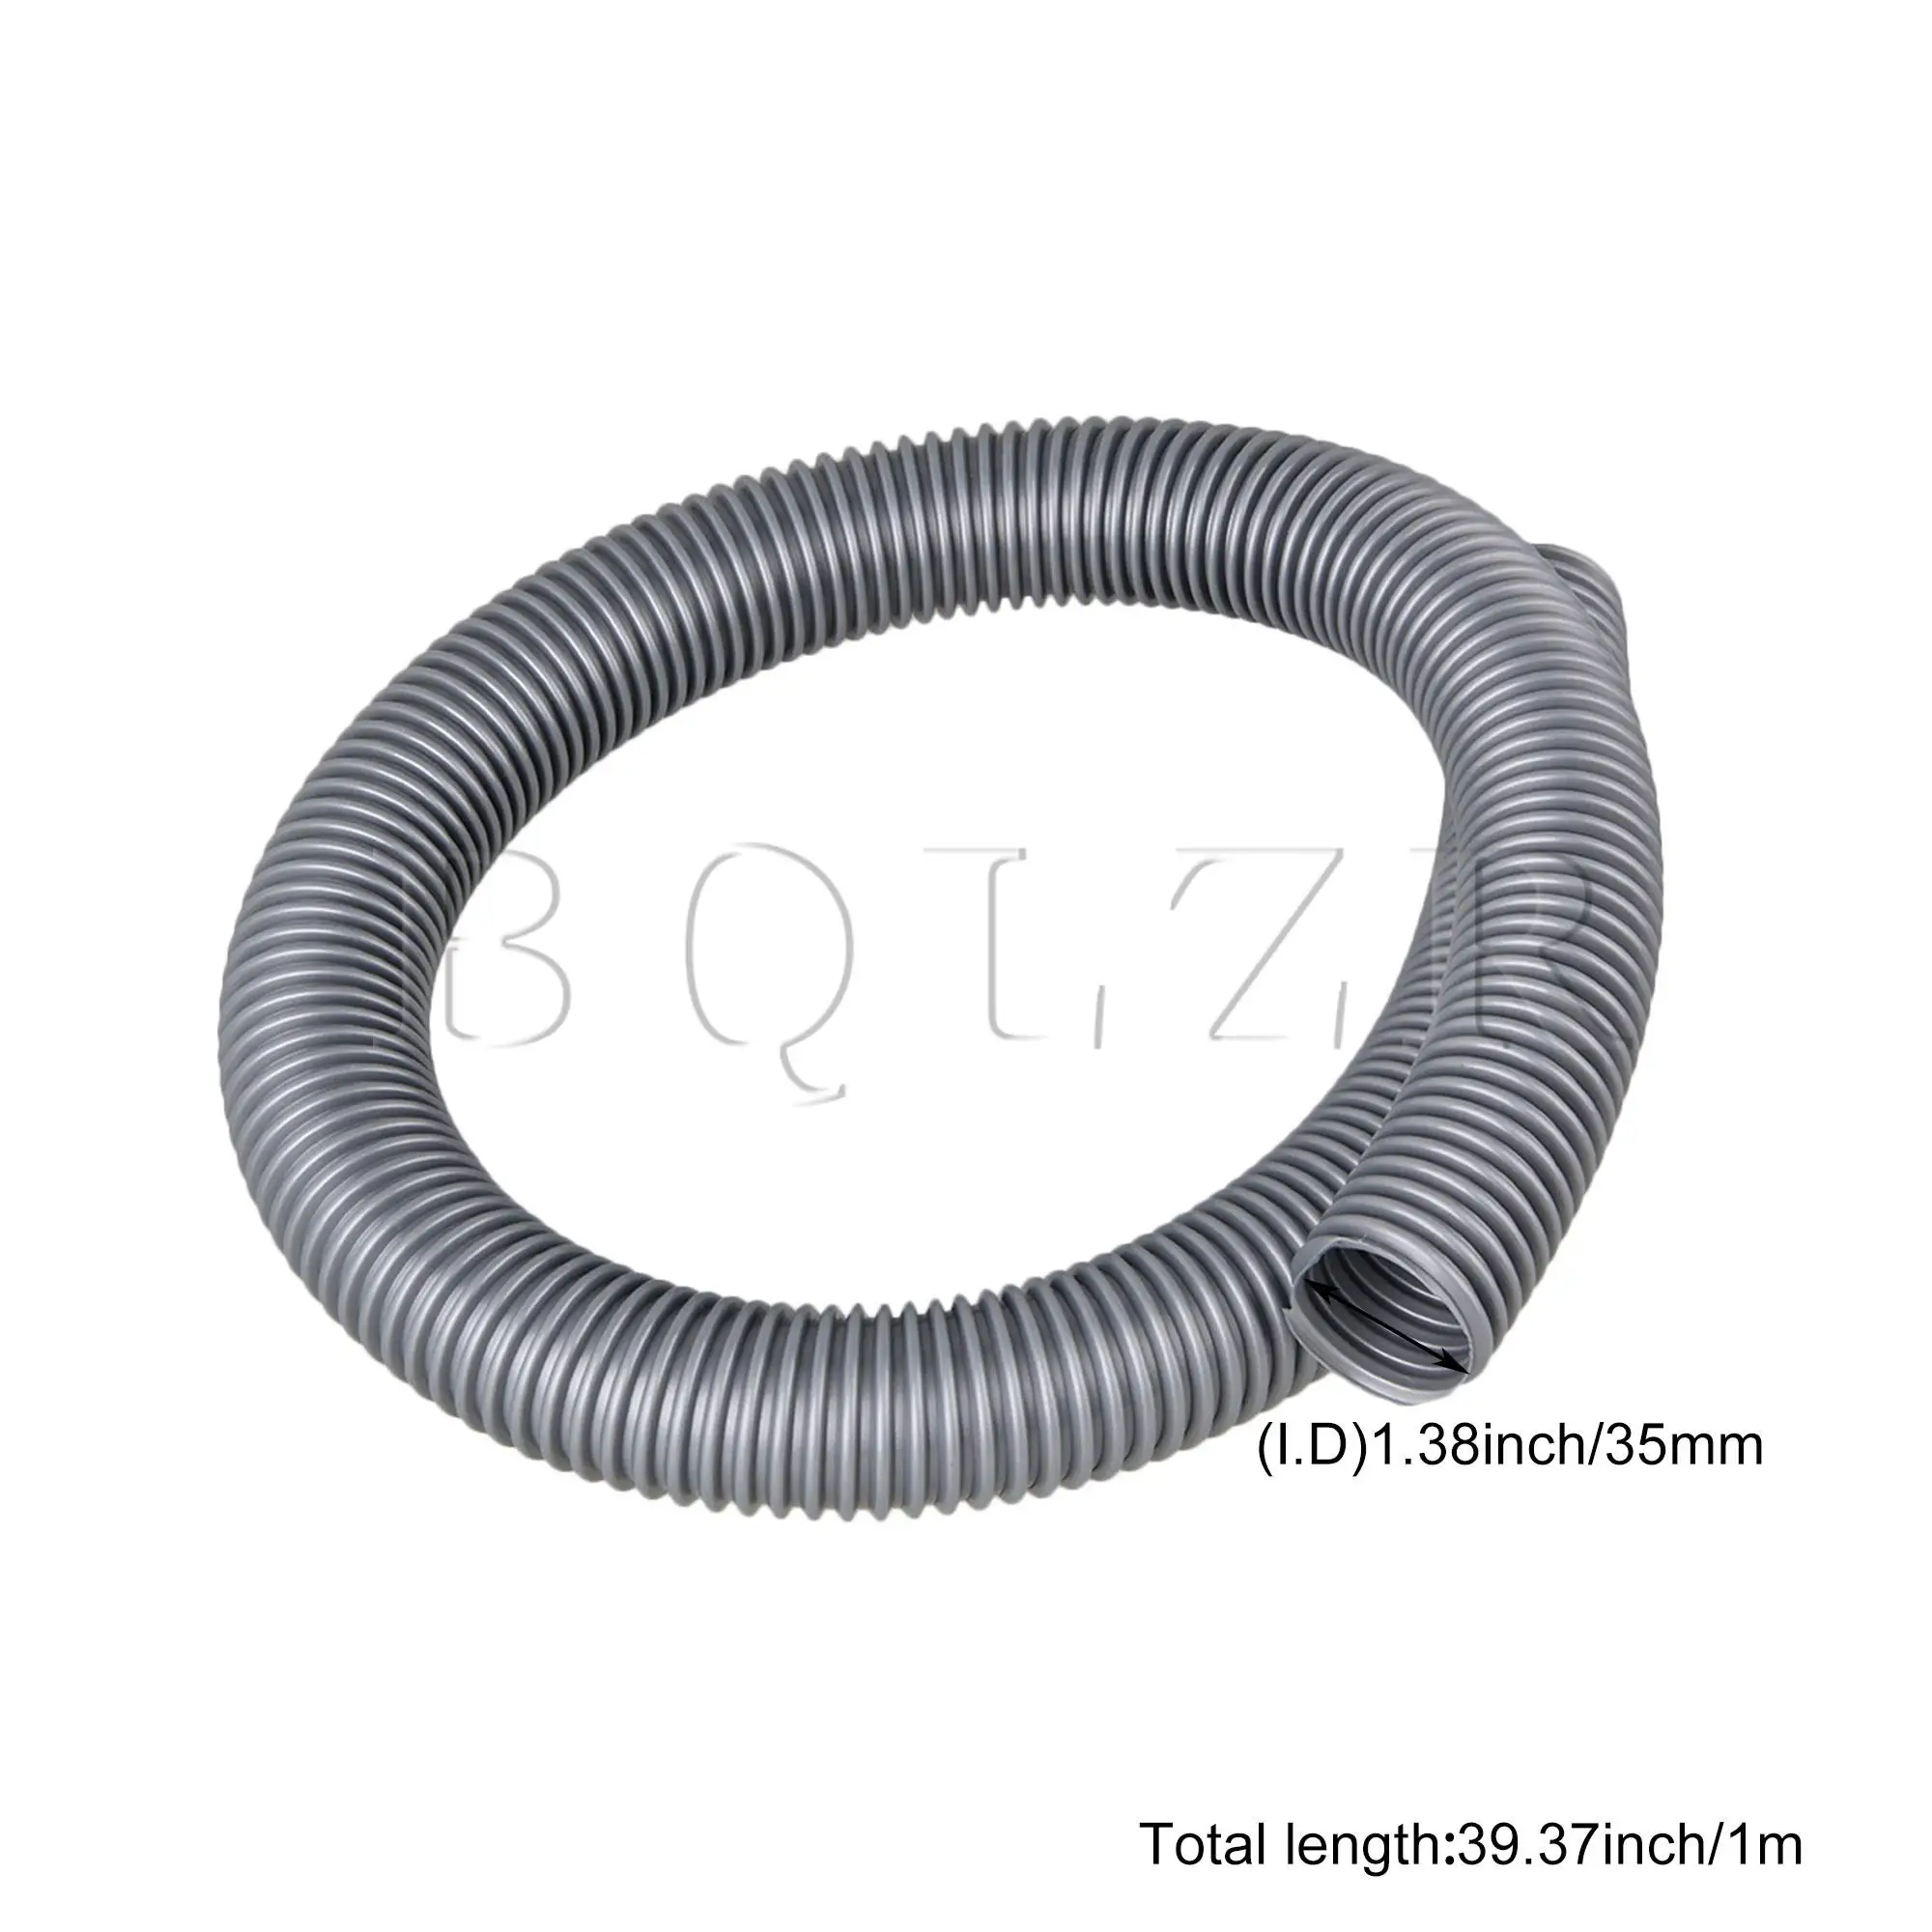 Basic Vacuum Cleaner Hose Accessory Kit Replacement 35mm 00245 Gray Plastic 